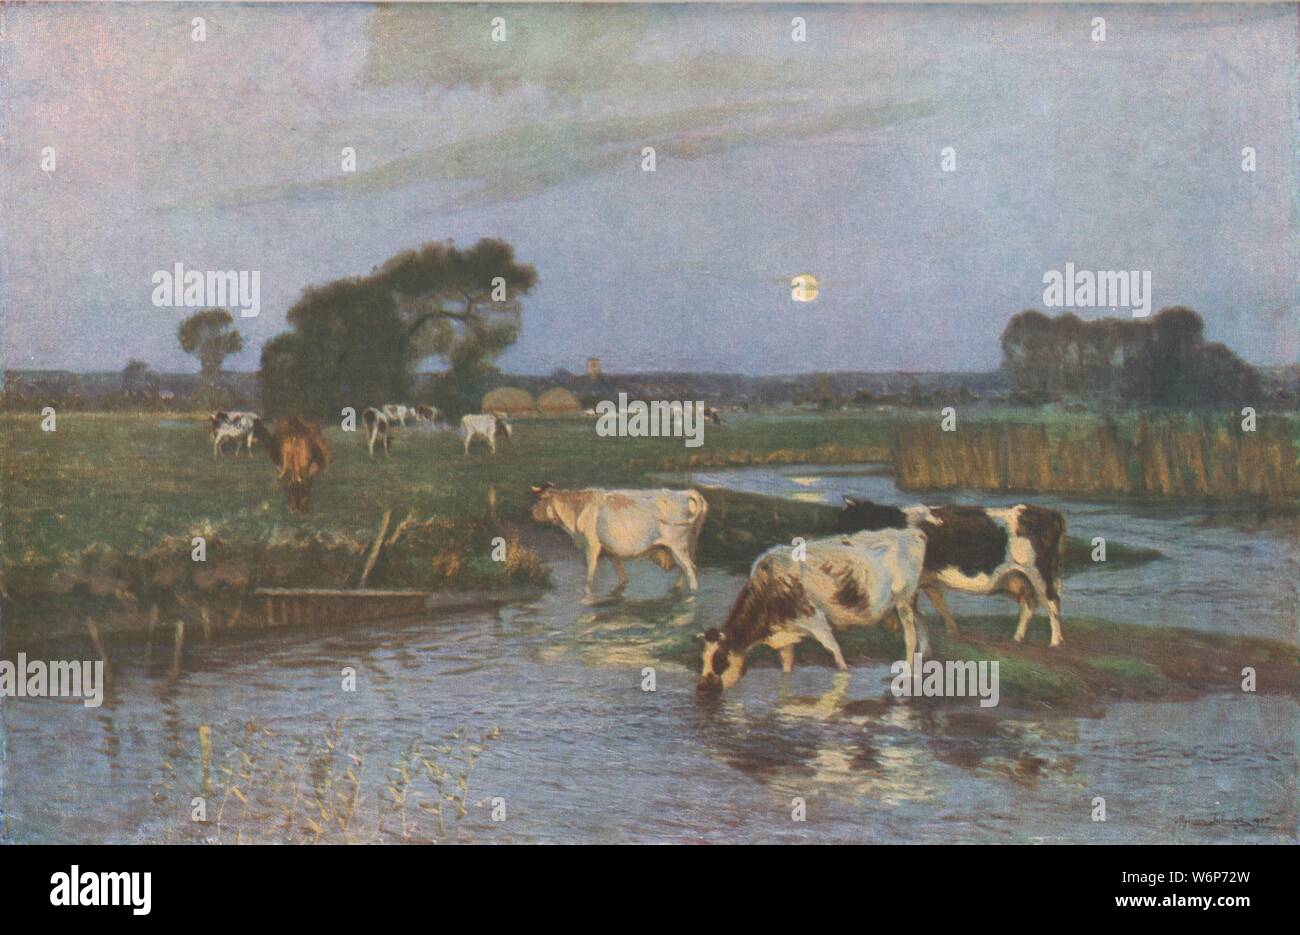 'The Ford', late 19th-early 20th century, (c1930). Cows drinking in a shallow river at dusk. Painting in the Gallery Oldham, Greater Manchester. From &quot;Modern Masterpieces of British Art&quot;. [The Amalgamated Press Ltd., London, c1930] Stock Photo